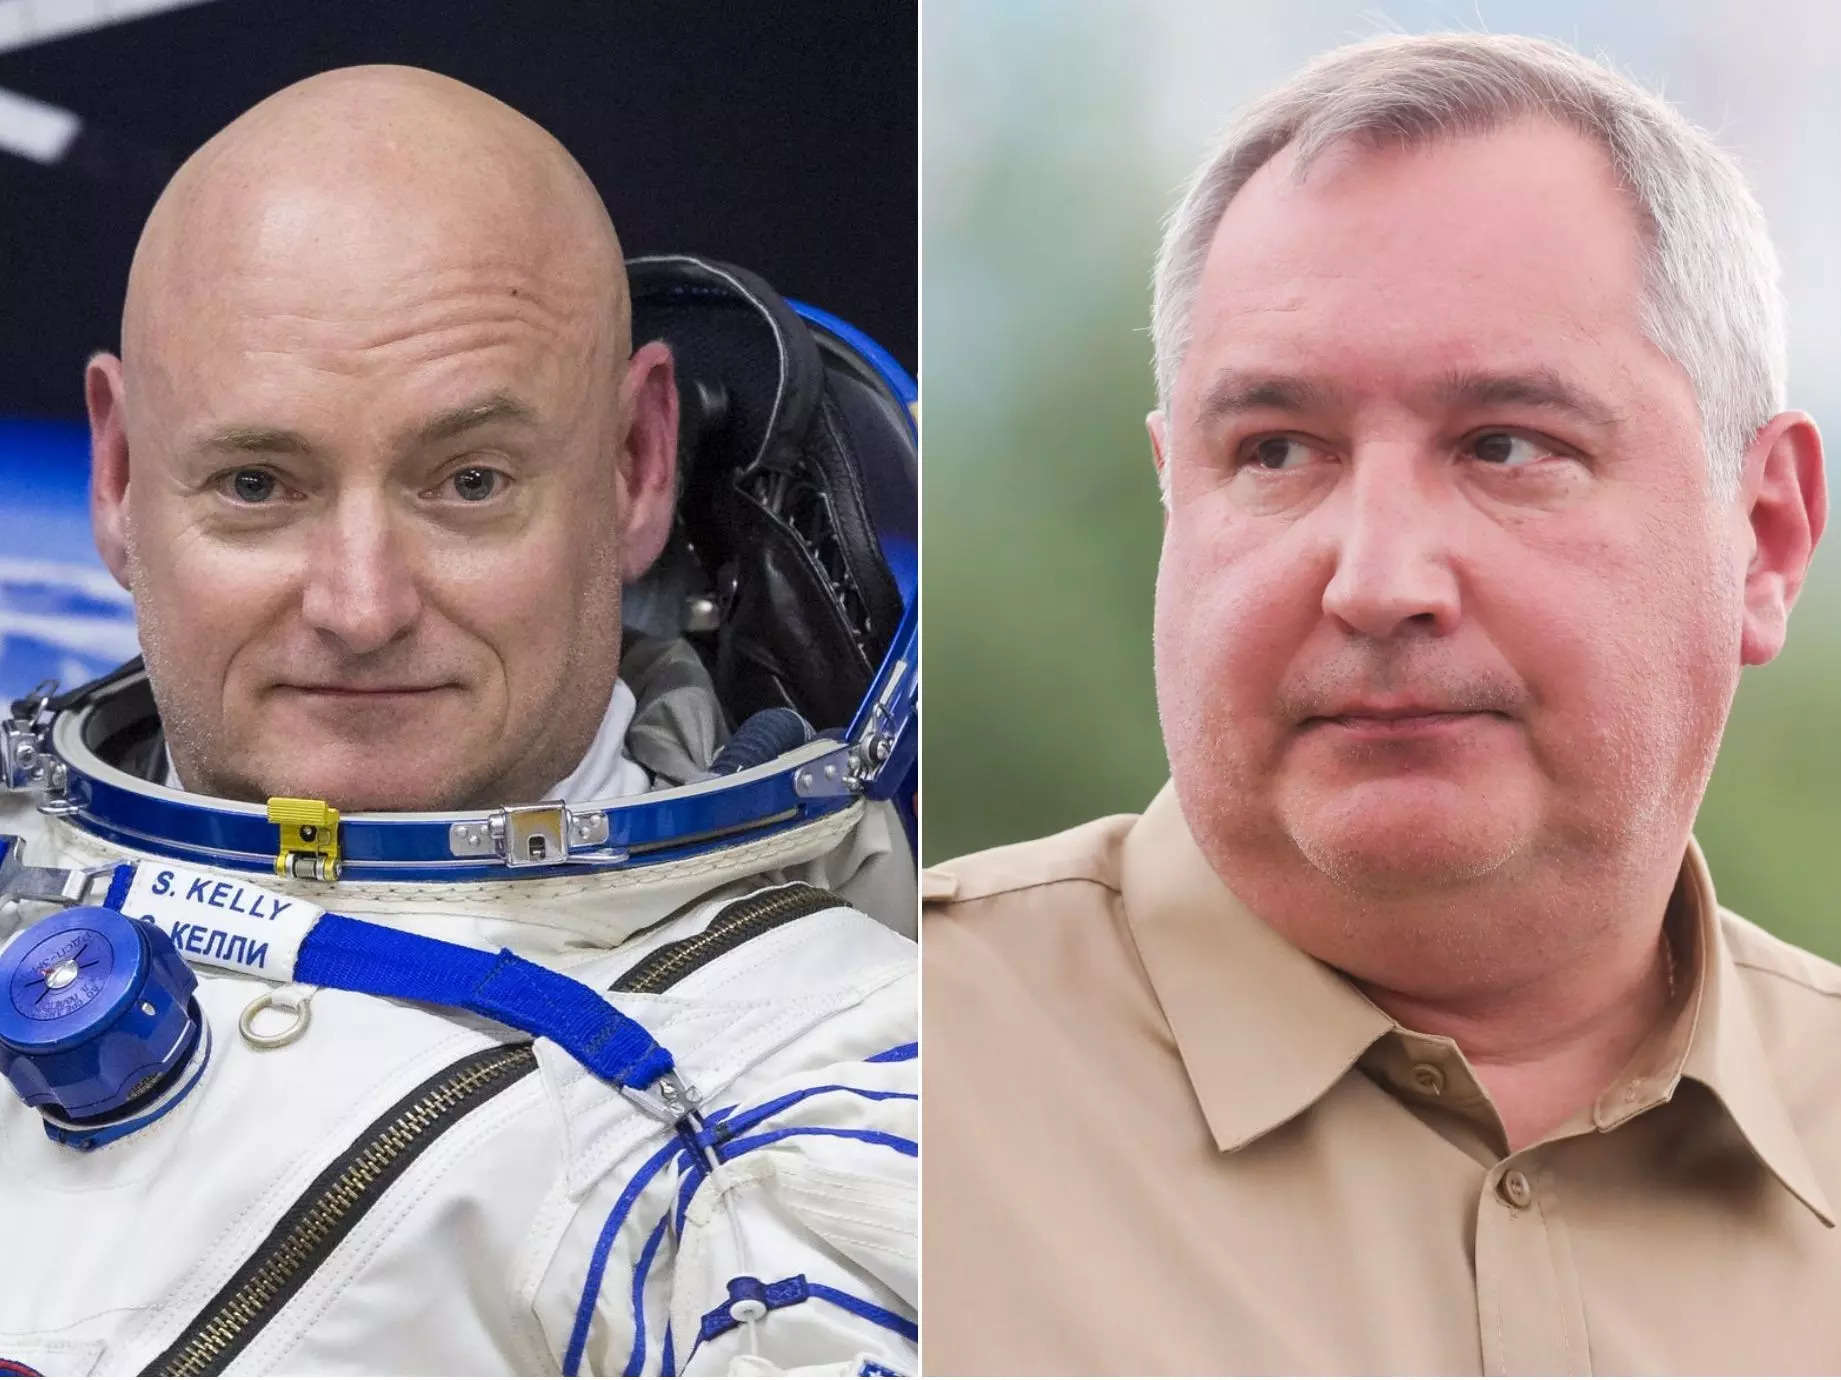 nasa astronaut scott kelly and russian space official dmitry rogozin portraits side by side